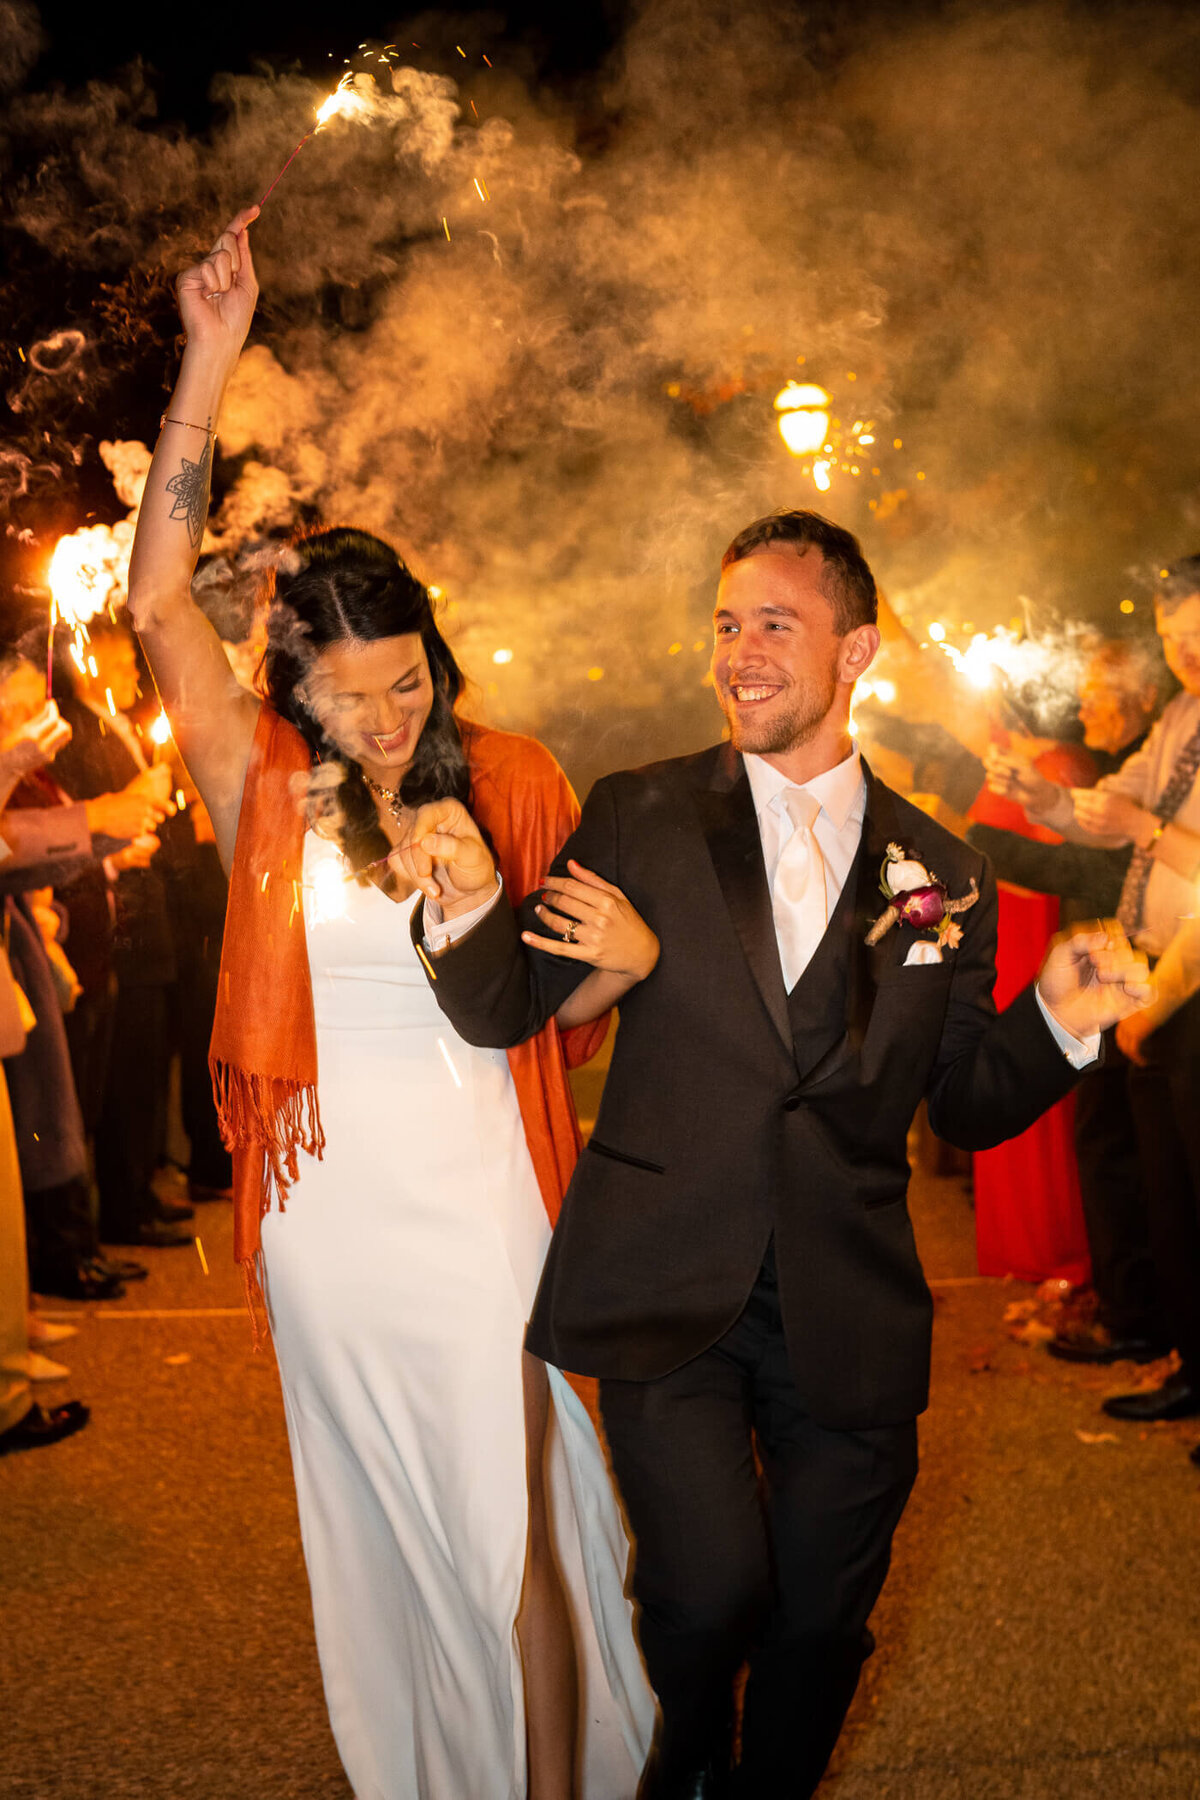 Bride and groom smile and laugh as they walk through their sparkler exit at the end of their wedding day at Phipps Conservatory and Botanical Gardens, Pittsburgh PA. Captured by Michael Fricke Photography, a Pittsburgh Wedding Photographer